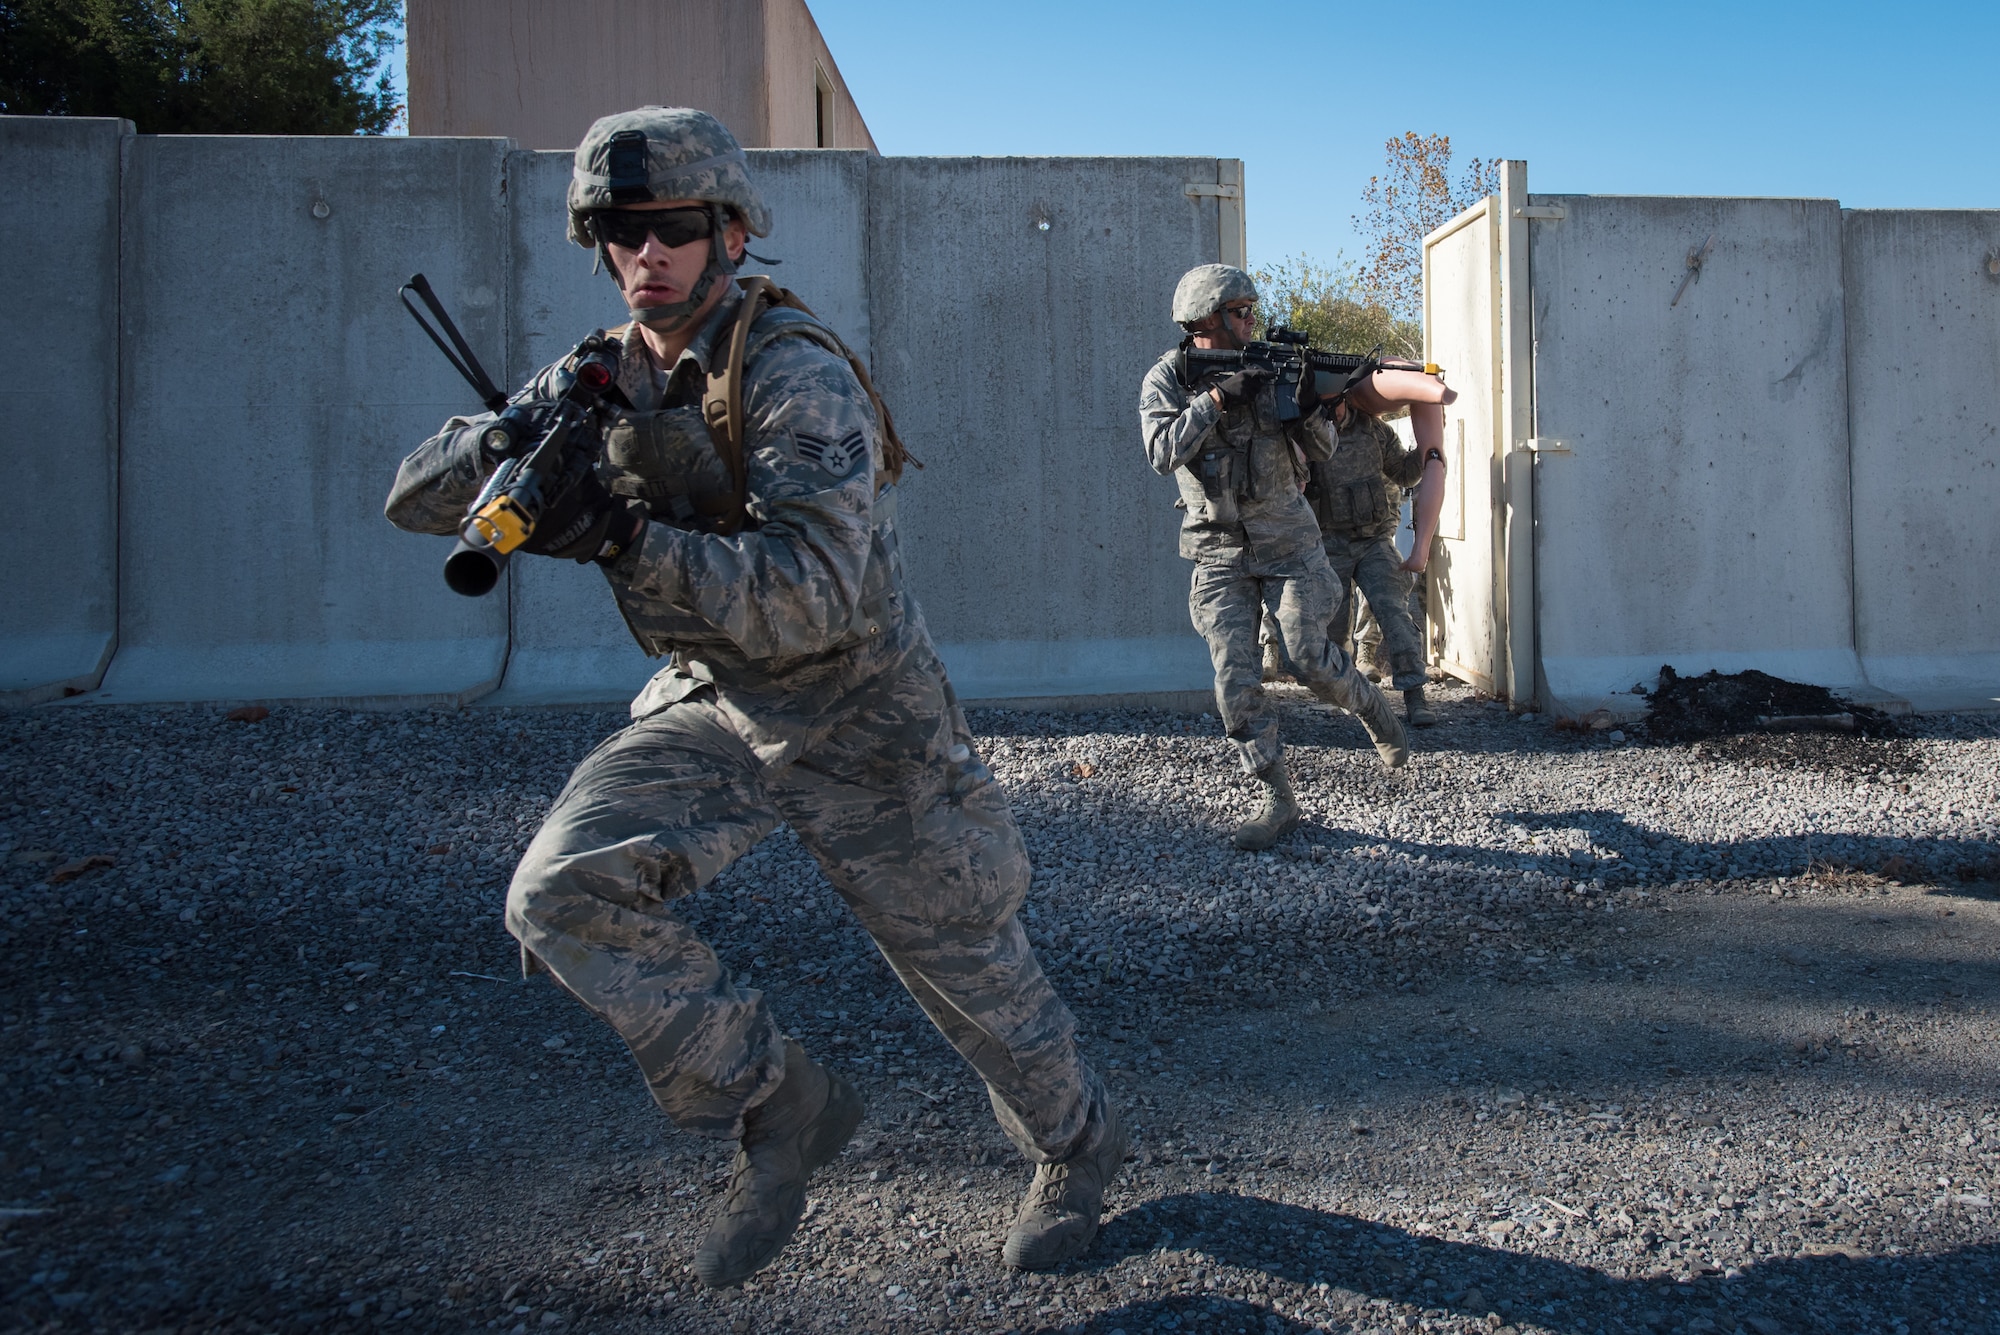 Fire Team members from the Kentucky Air National Guard’s 123rd Security Forces Squadron conduct training to recover a simulated downed pilot inside a mock Afghan Village at Fort Knox, Ky., Oct. 20, 2015. The Airmen were required to execute a coordinated search while defending their positions and engaging hostile enemy forces. (U.S. Air National Guard photo by Maj. Dale Greer)